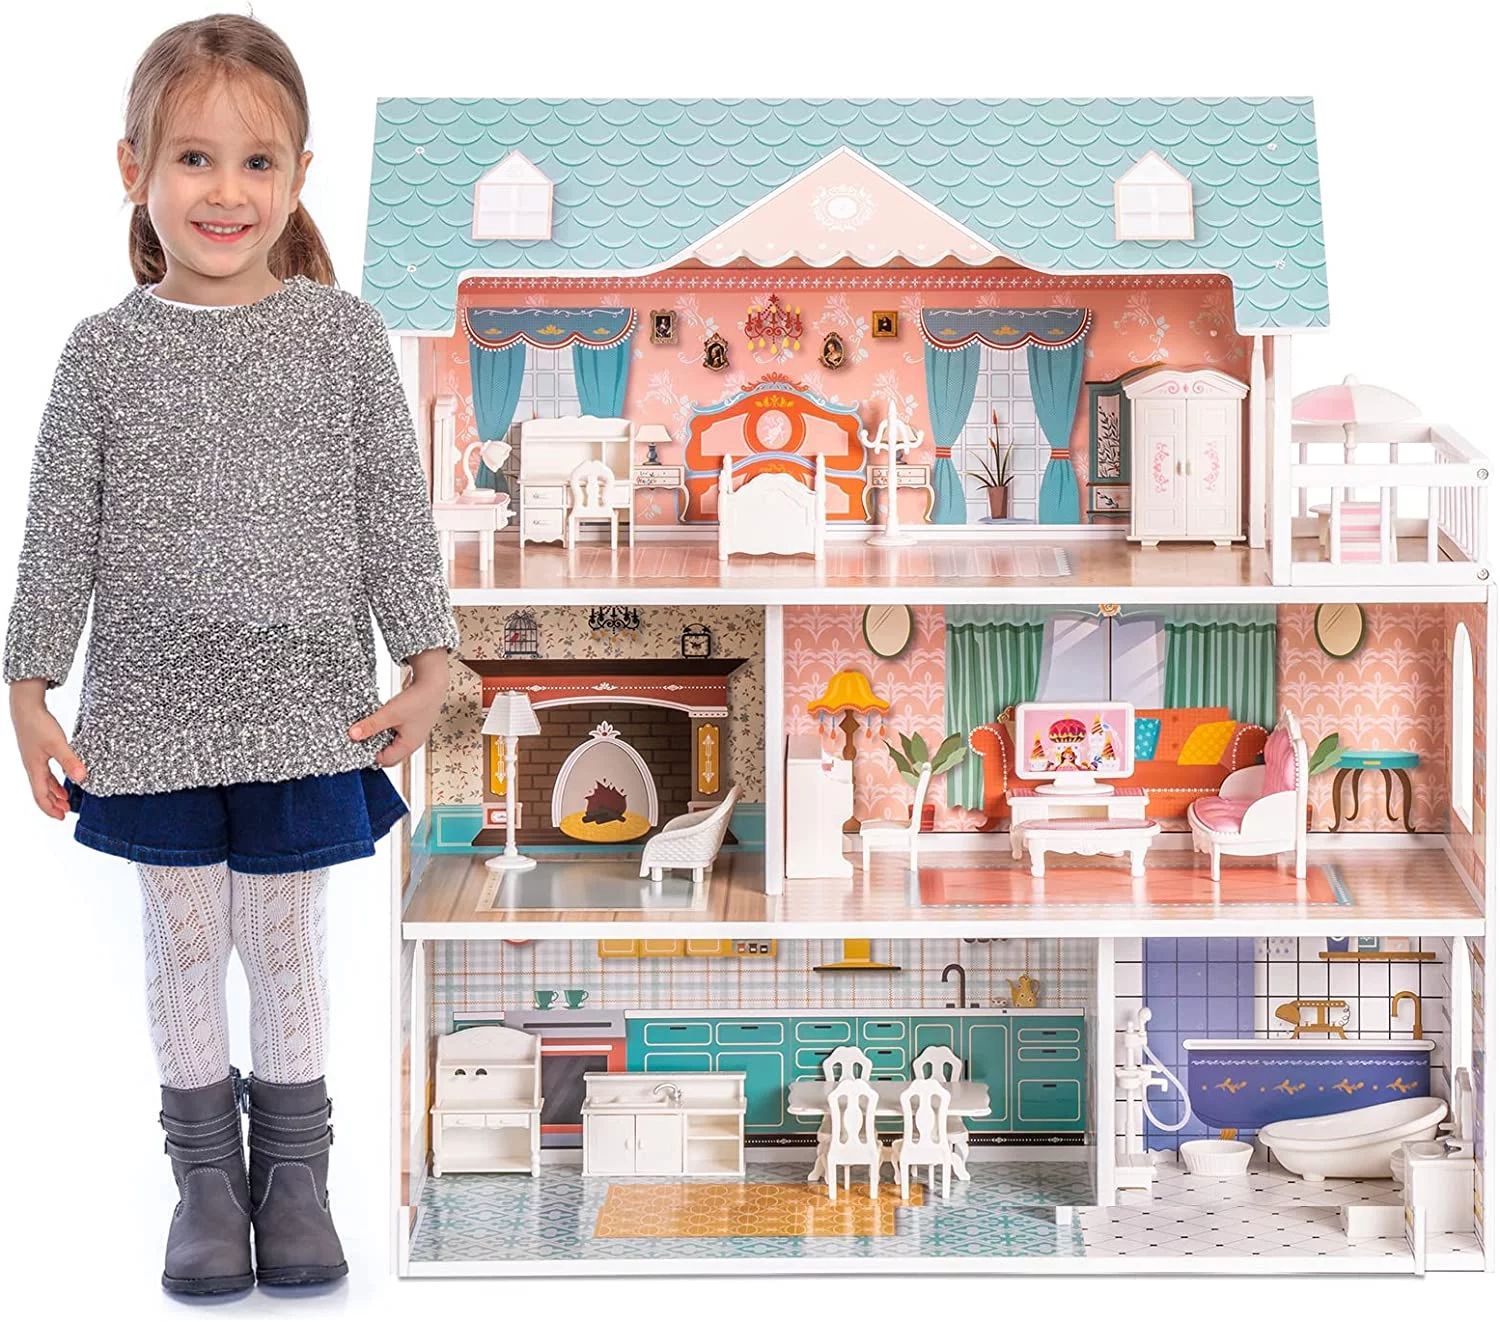 ROBUD Wooden Dollhouse for Kids Girls, Toy Gift for 3 4 5 6 Years Old, with Furniture | Walmart (US)